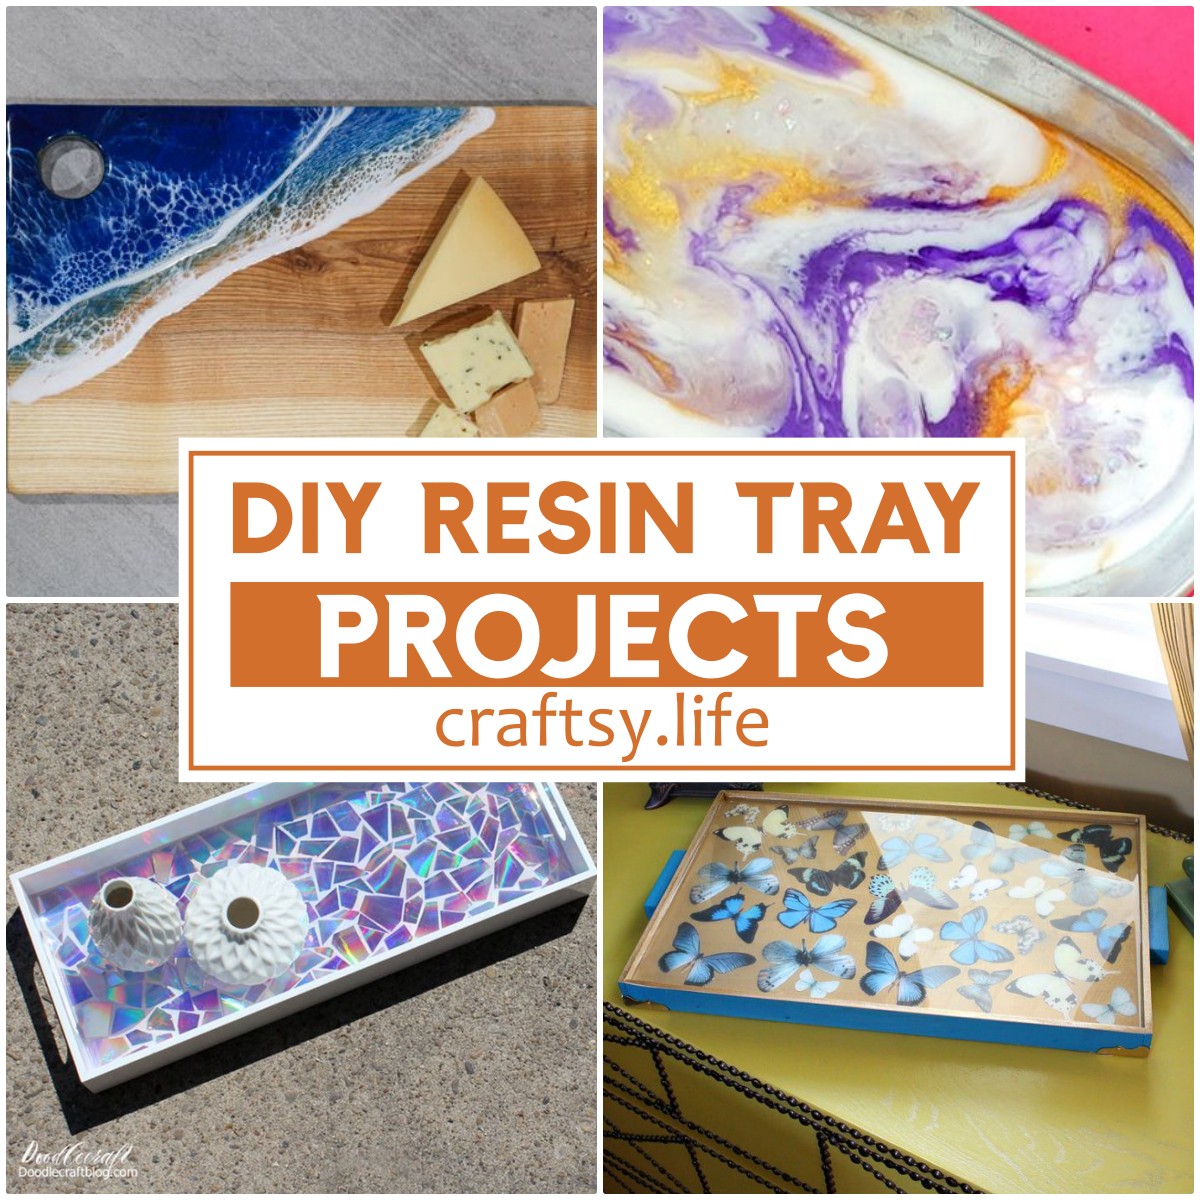 DIY Resin Tray Projects